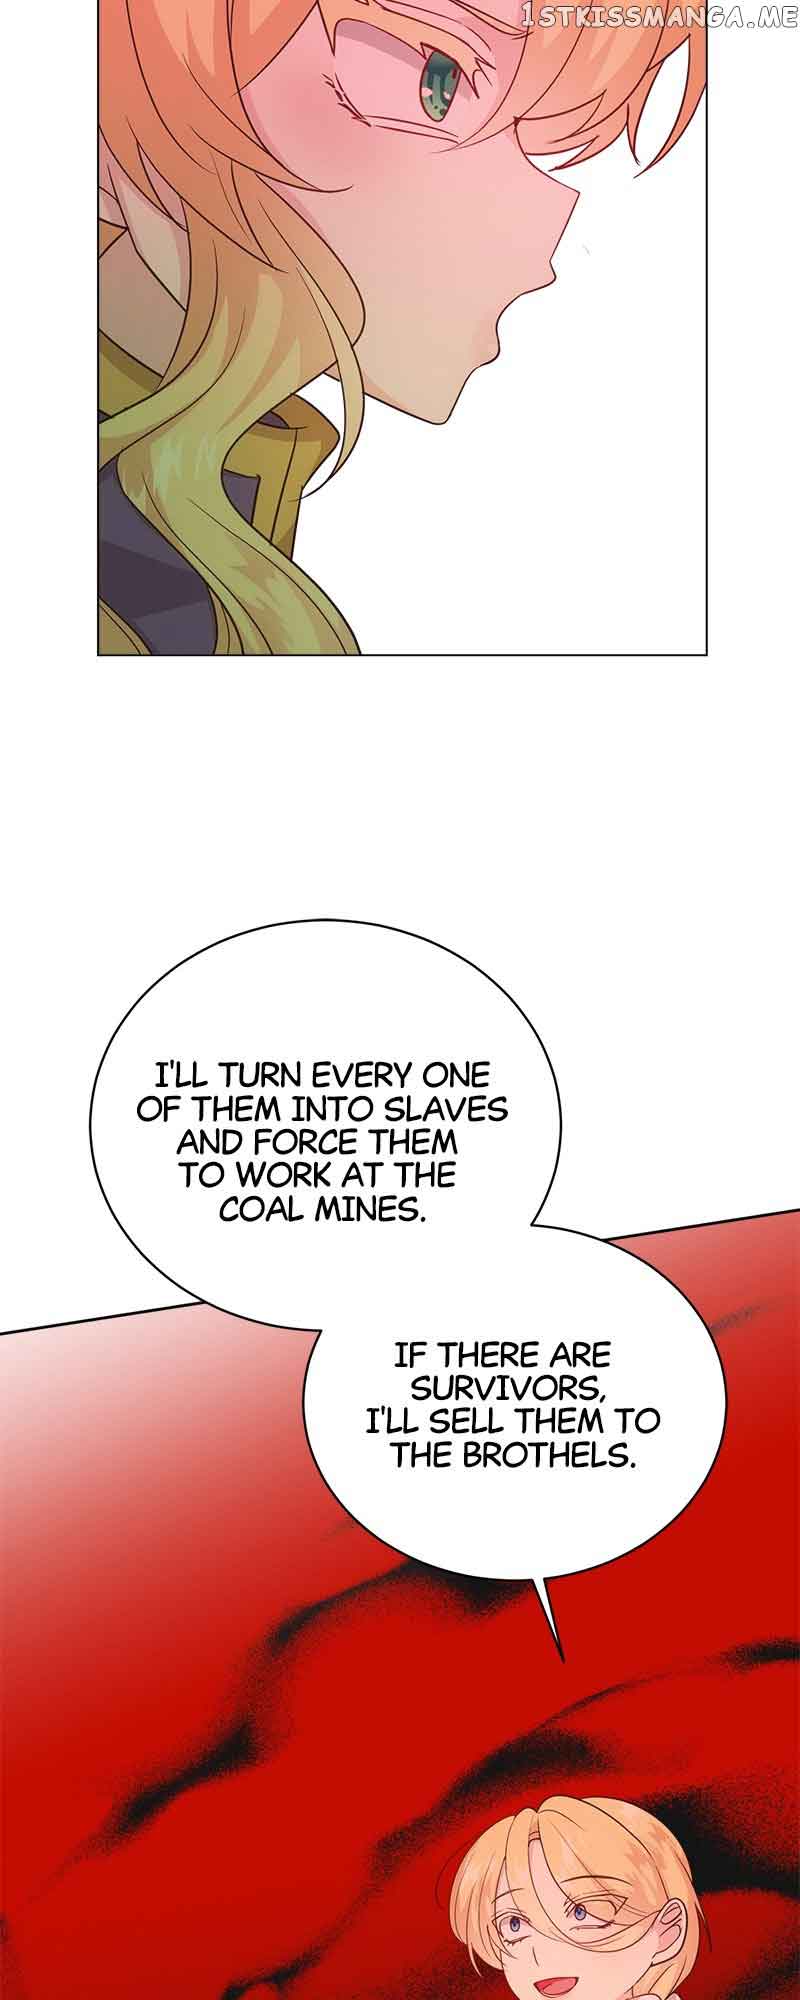 This World Is Mine - Page 4